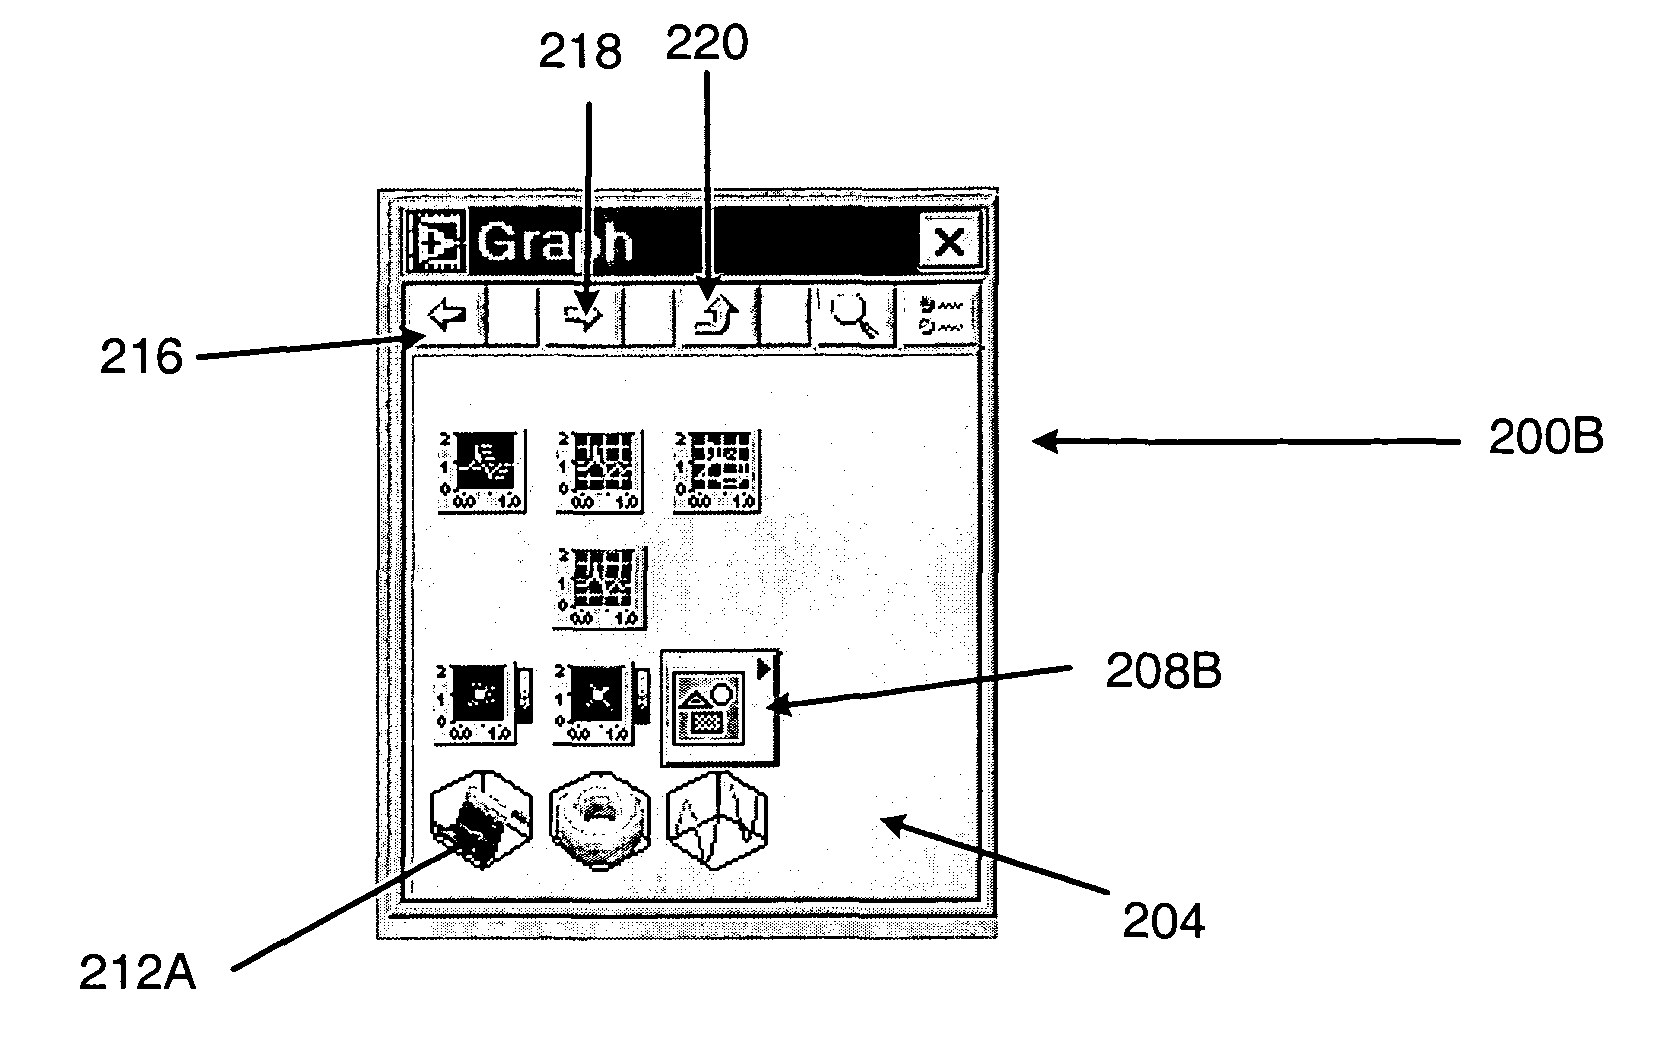 Graphical user interface including palette windows with an improved navigation interface